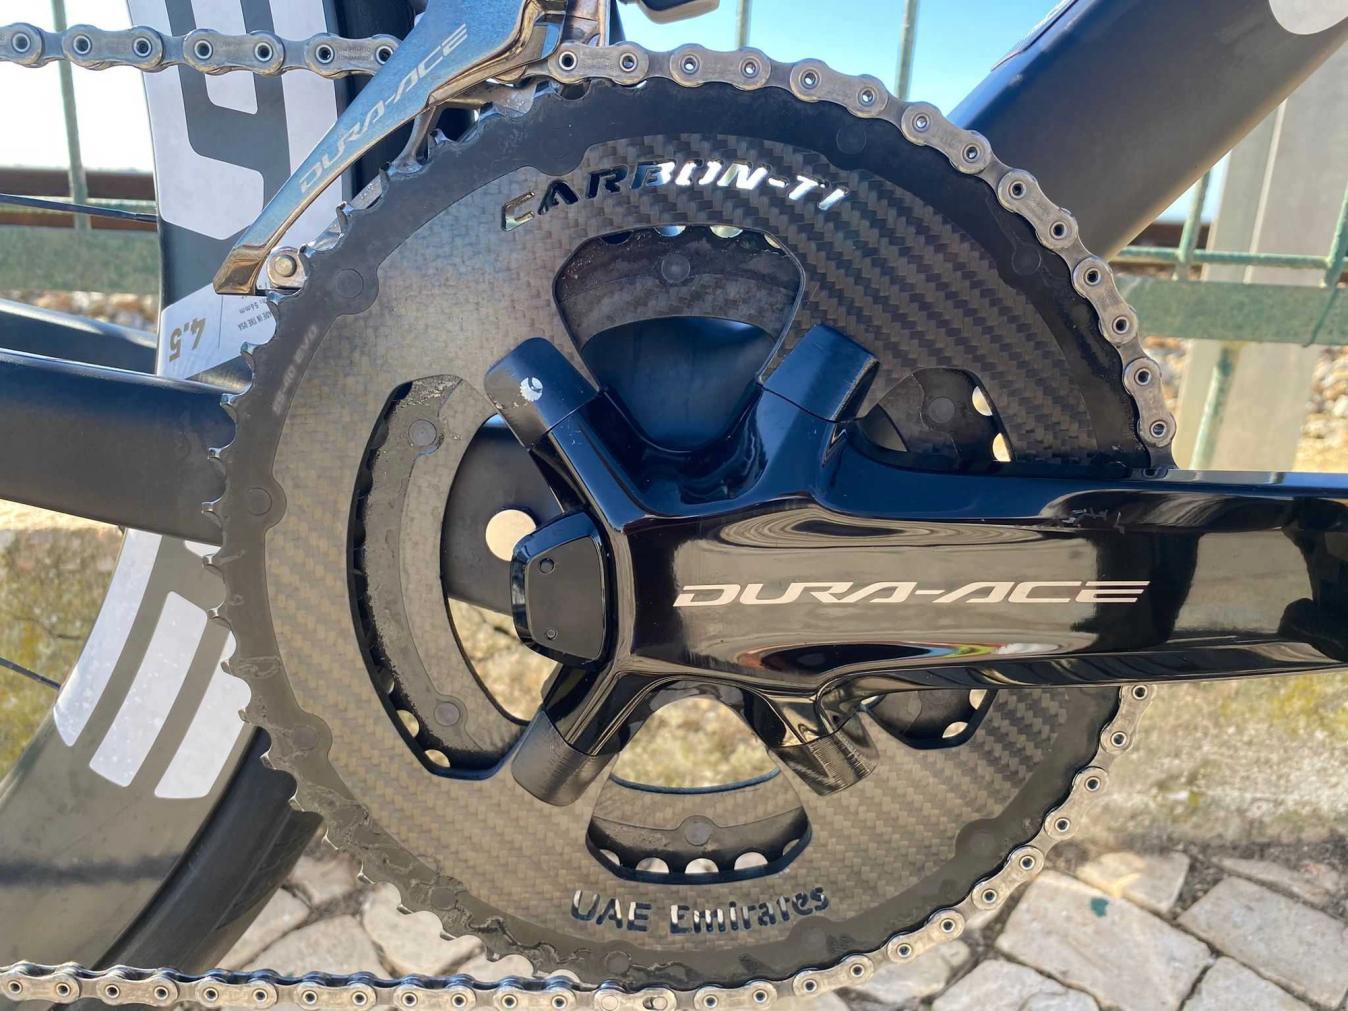 Carbon-Ti chainrings were swapped in for the stock Shimano Dura-Ace options